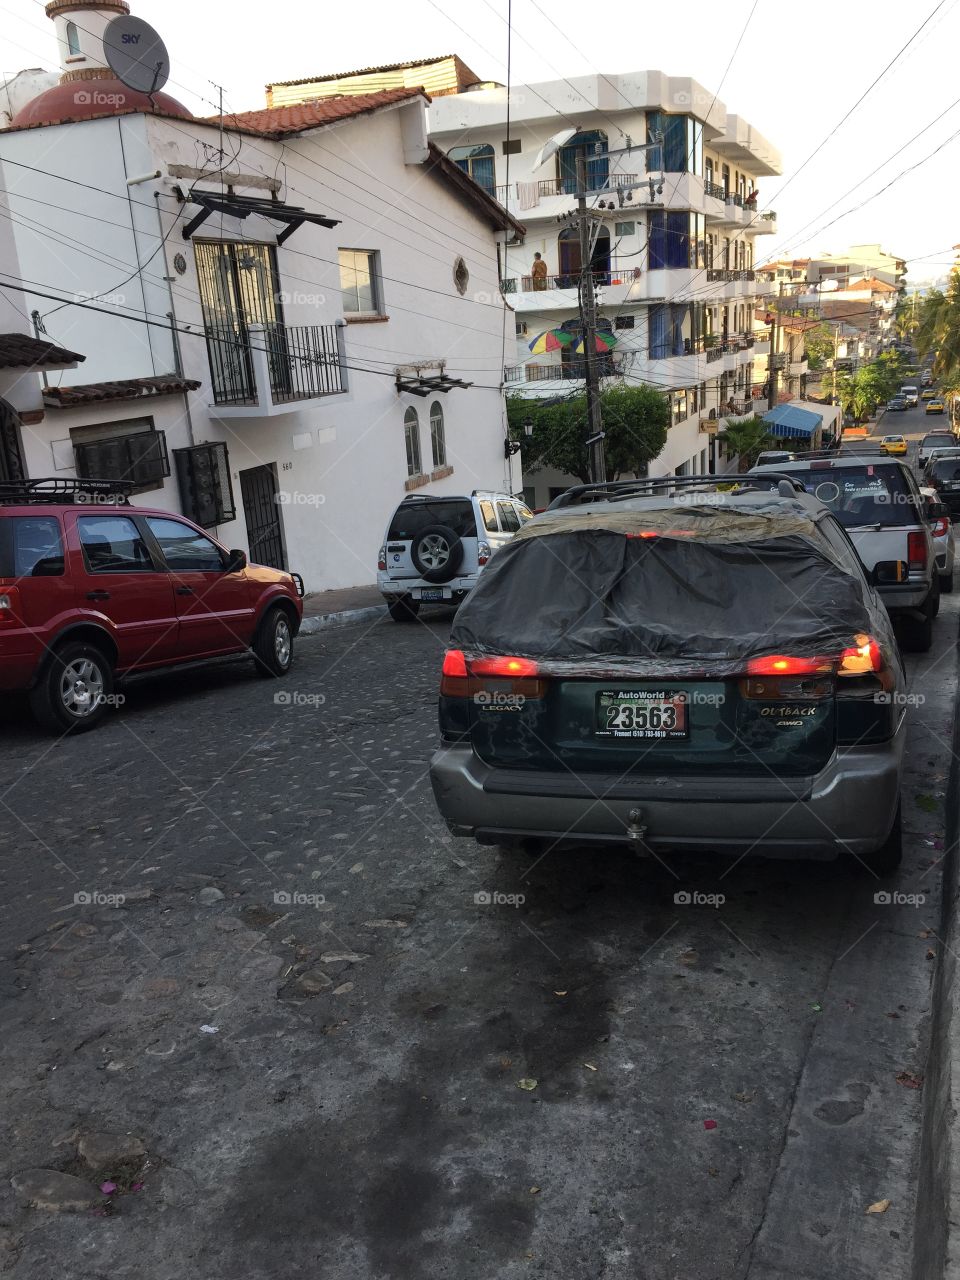 street and car in mexico